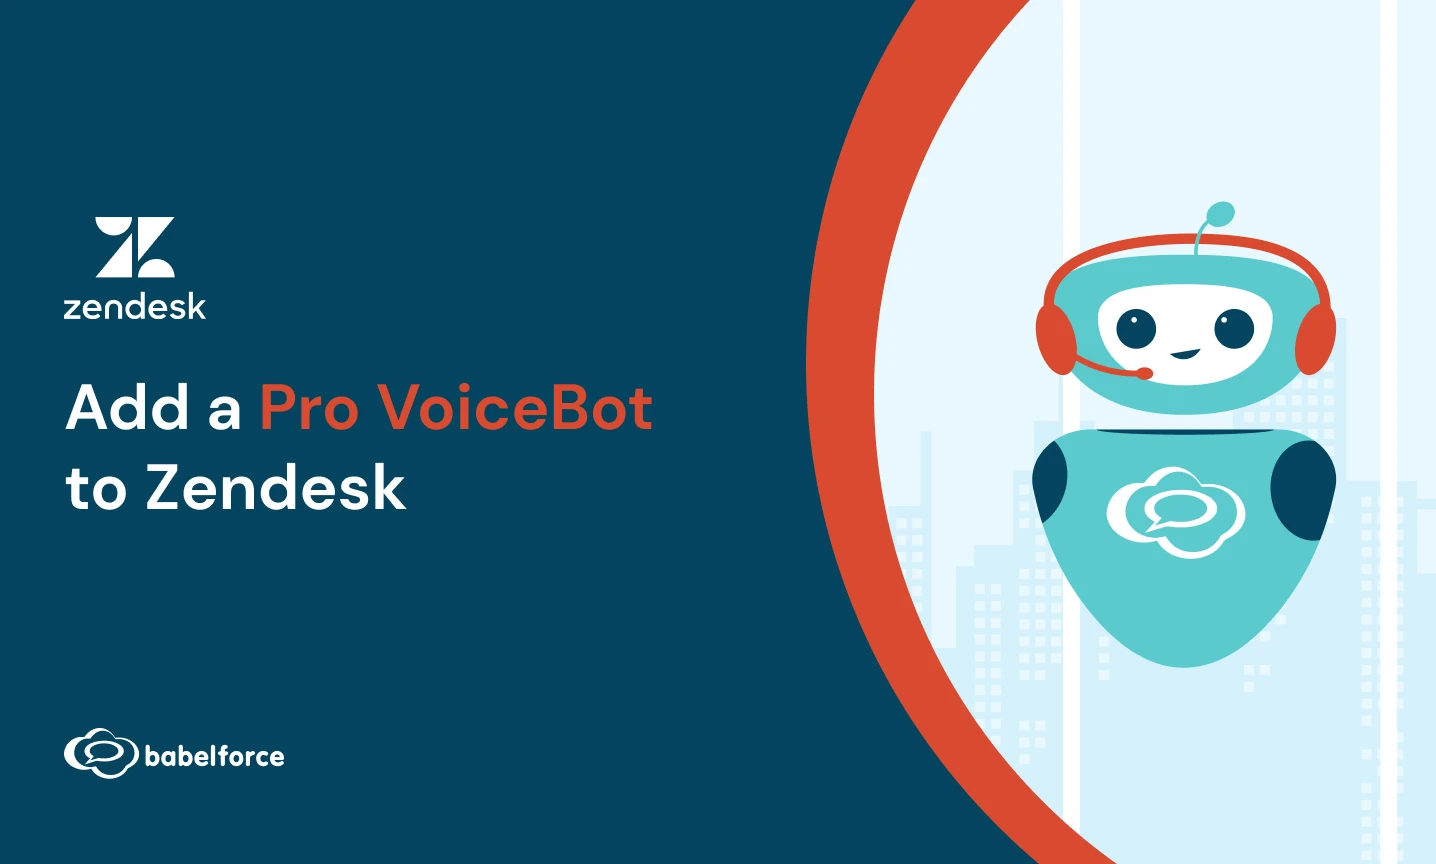 Add a pro VoiceBot to Zendesk